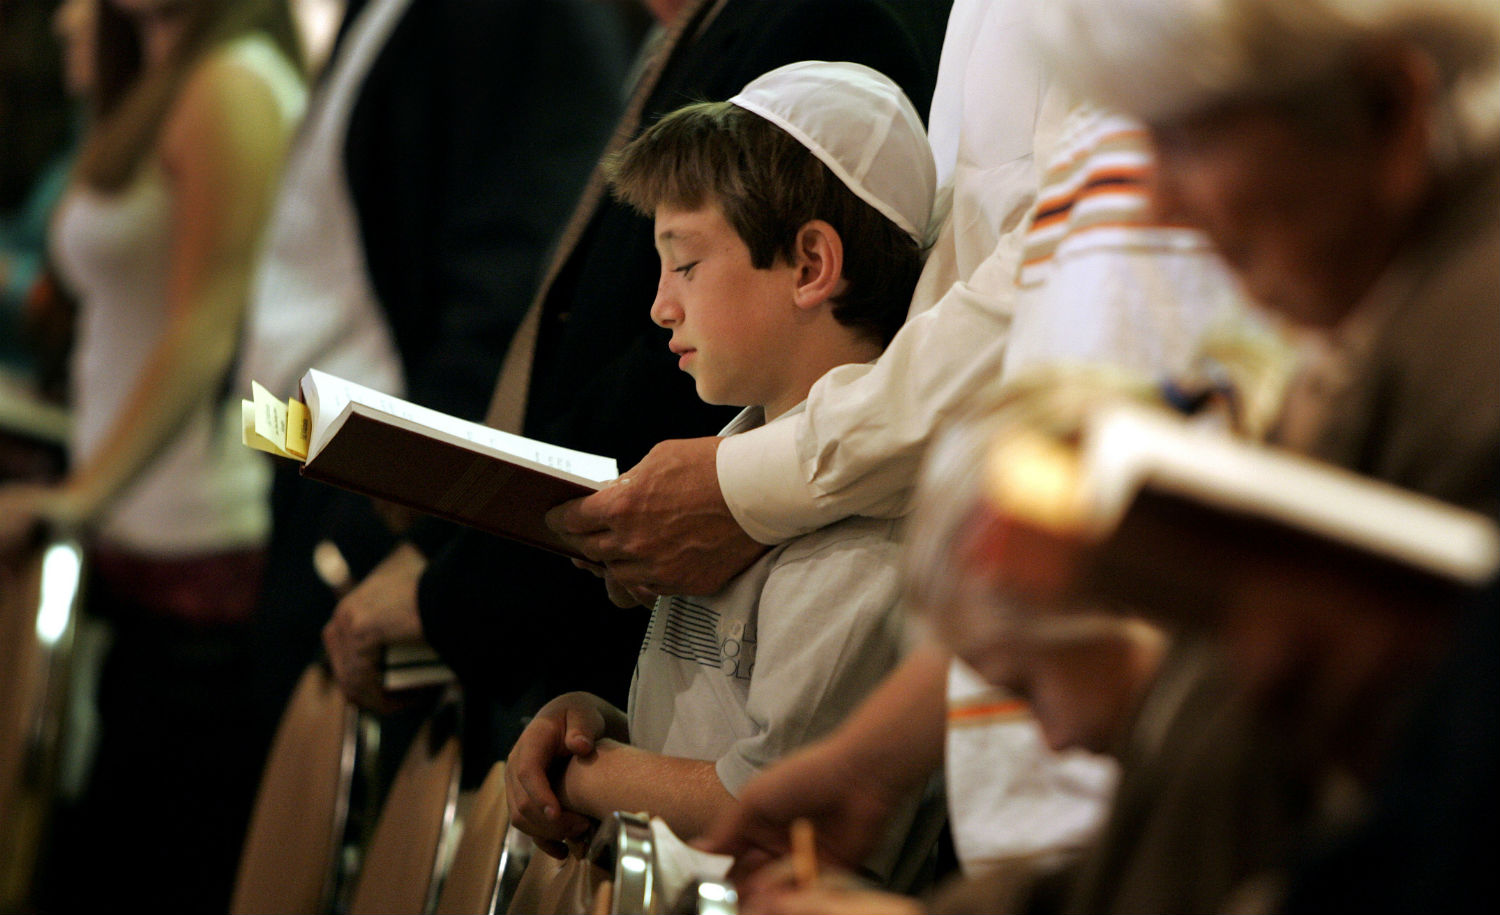 
A father and son praying. Gina Ferazzi/Los Angeles Times via Getty Images.

